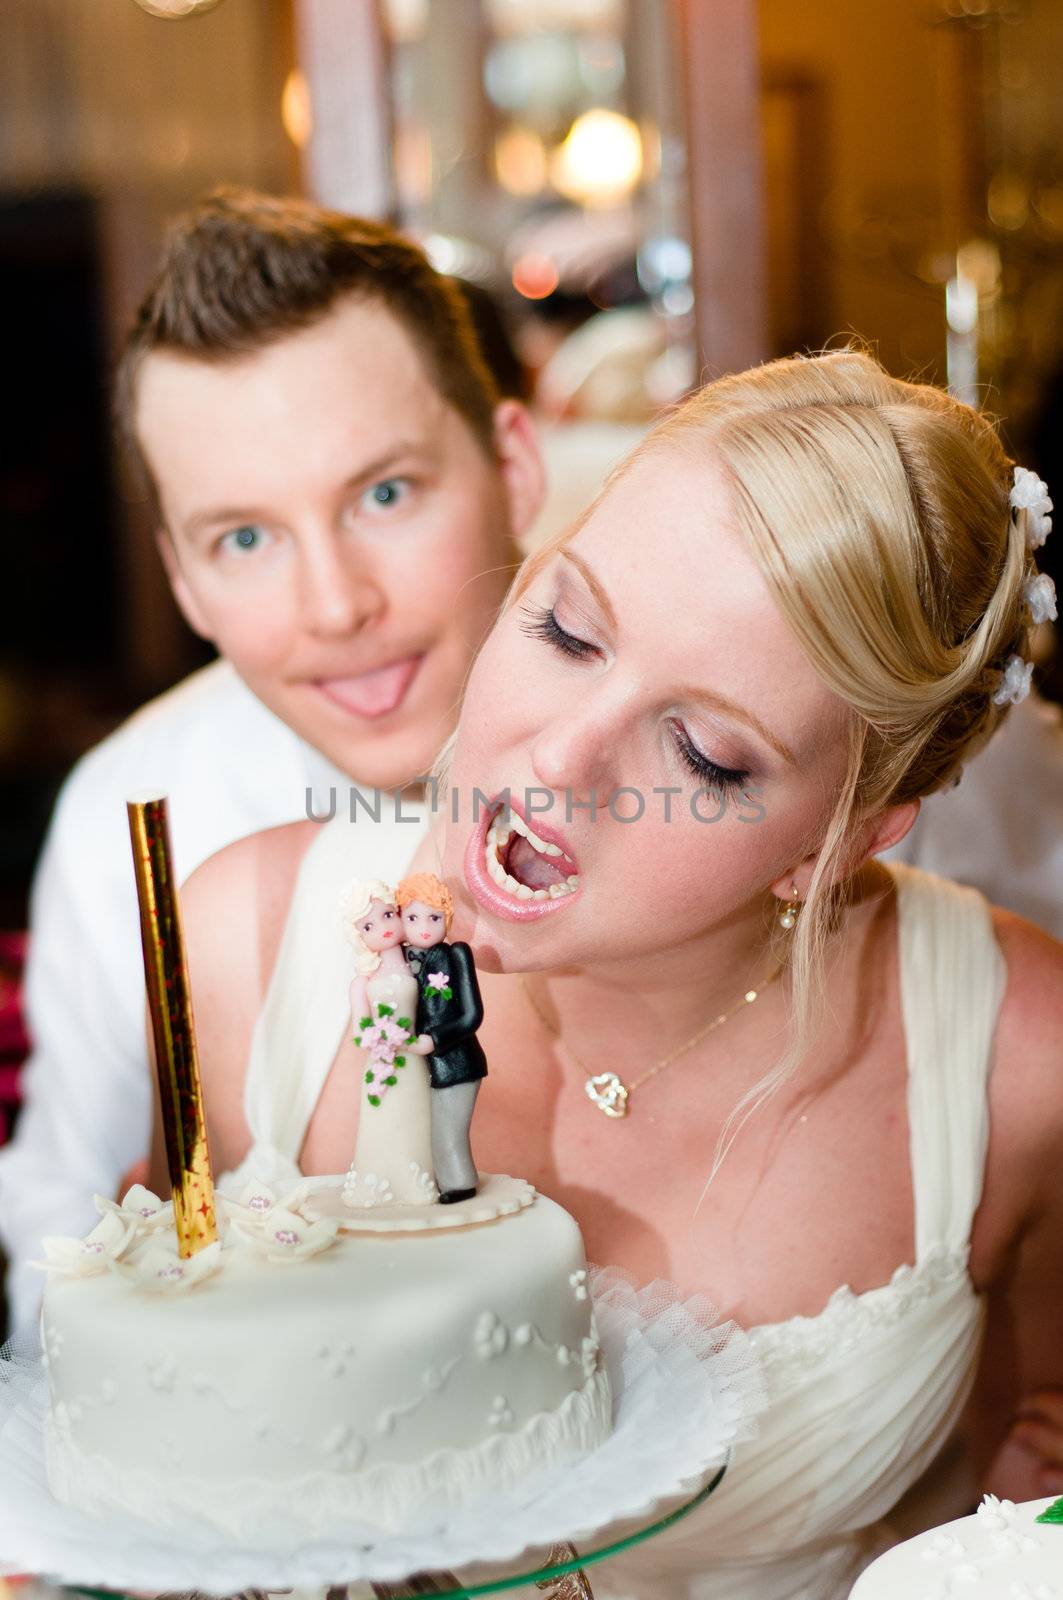 Young bride is going to bite her cake with groom in background